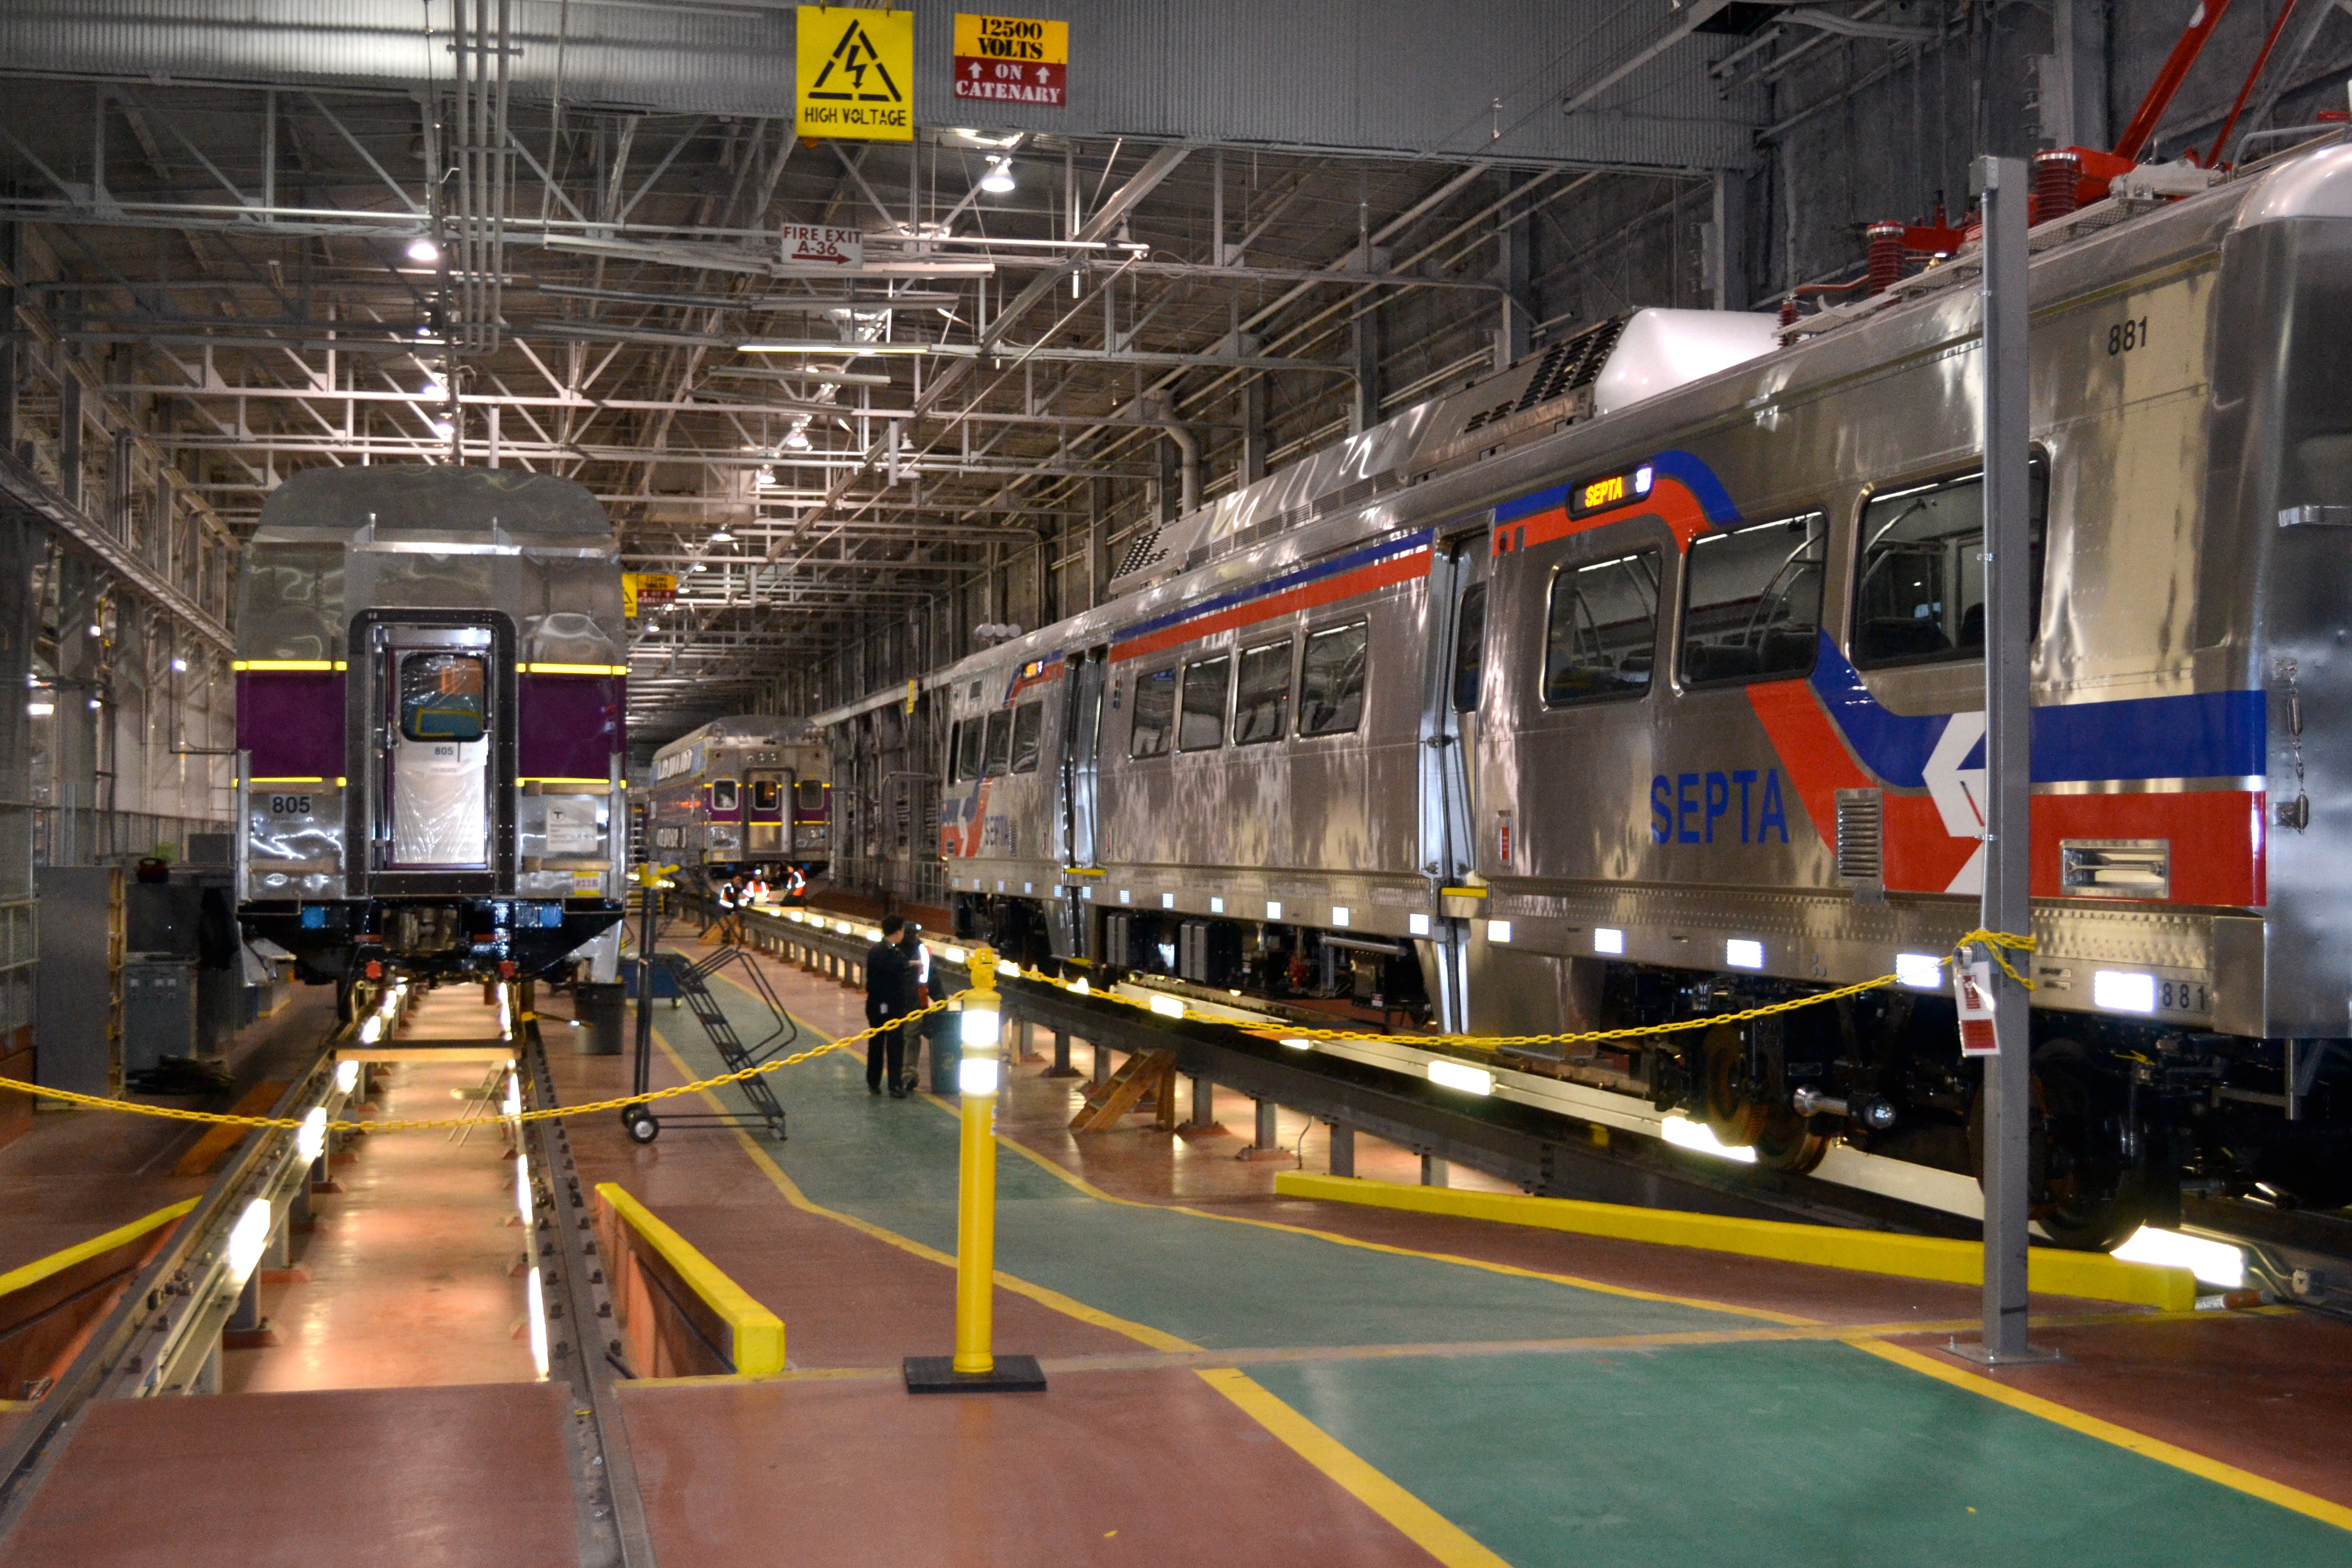 Next Rotem will build 75 rail cars for Boston's MBTA and 56 rail cars for Denver's transit system